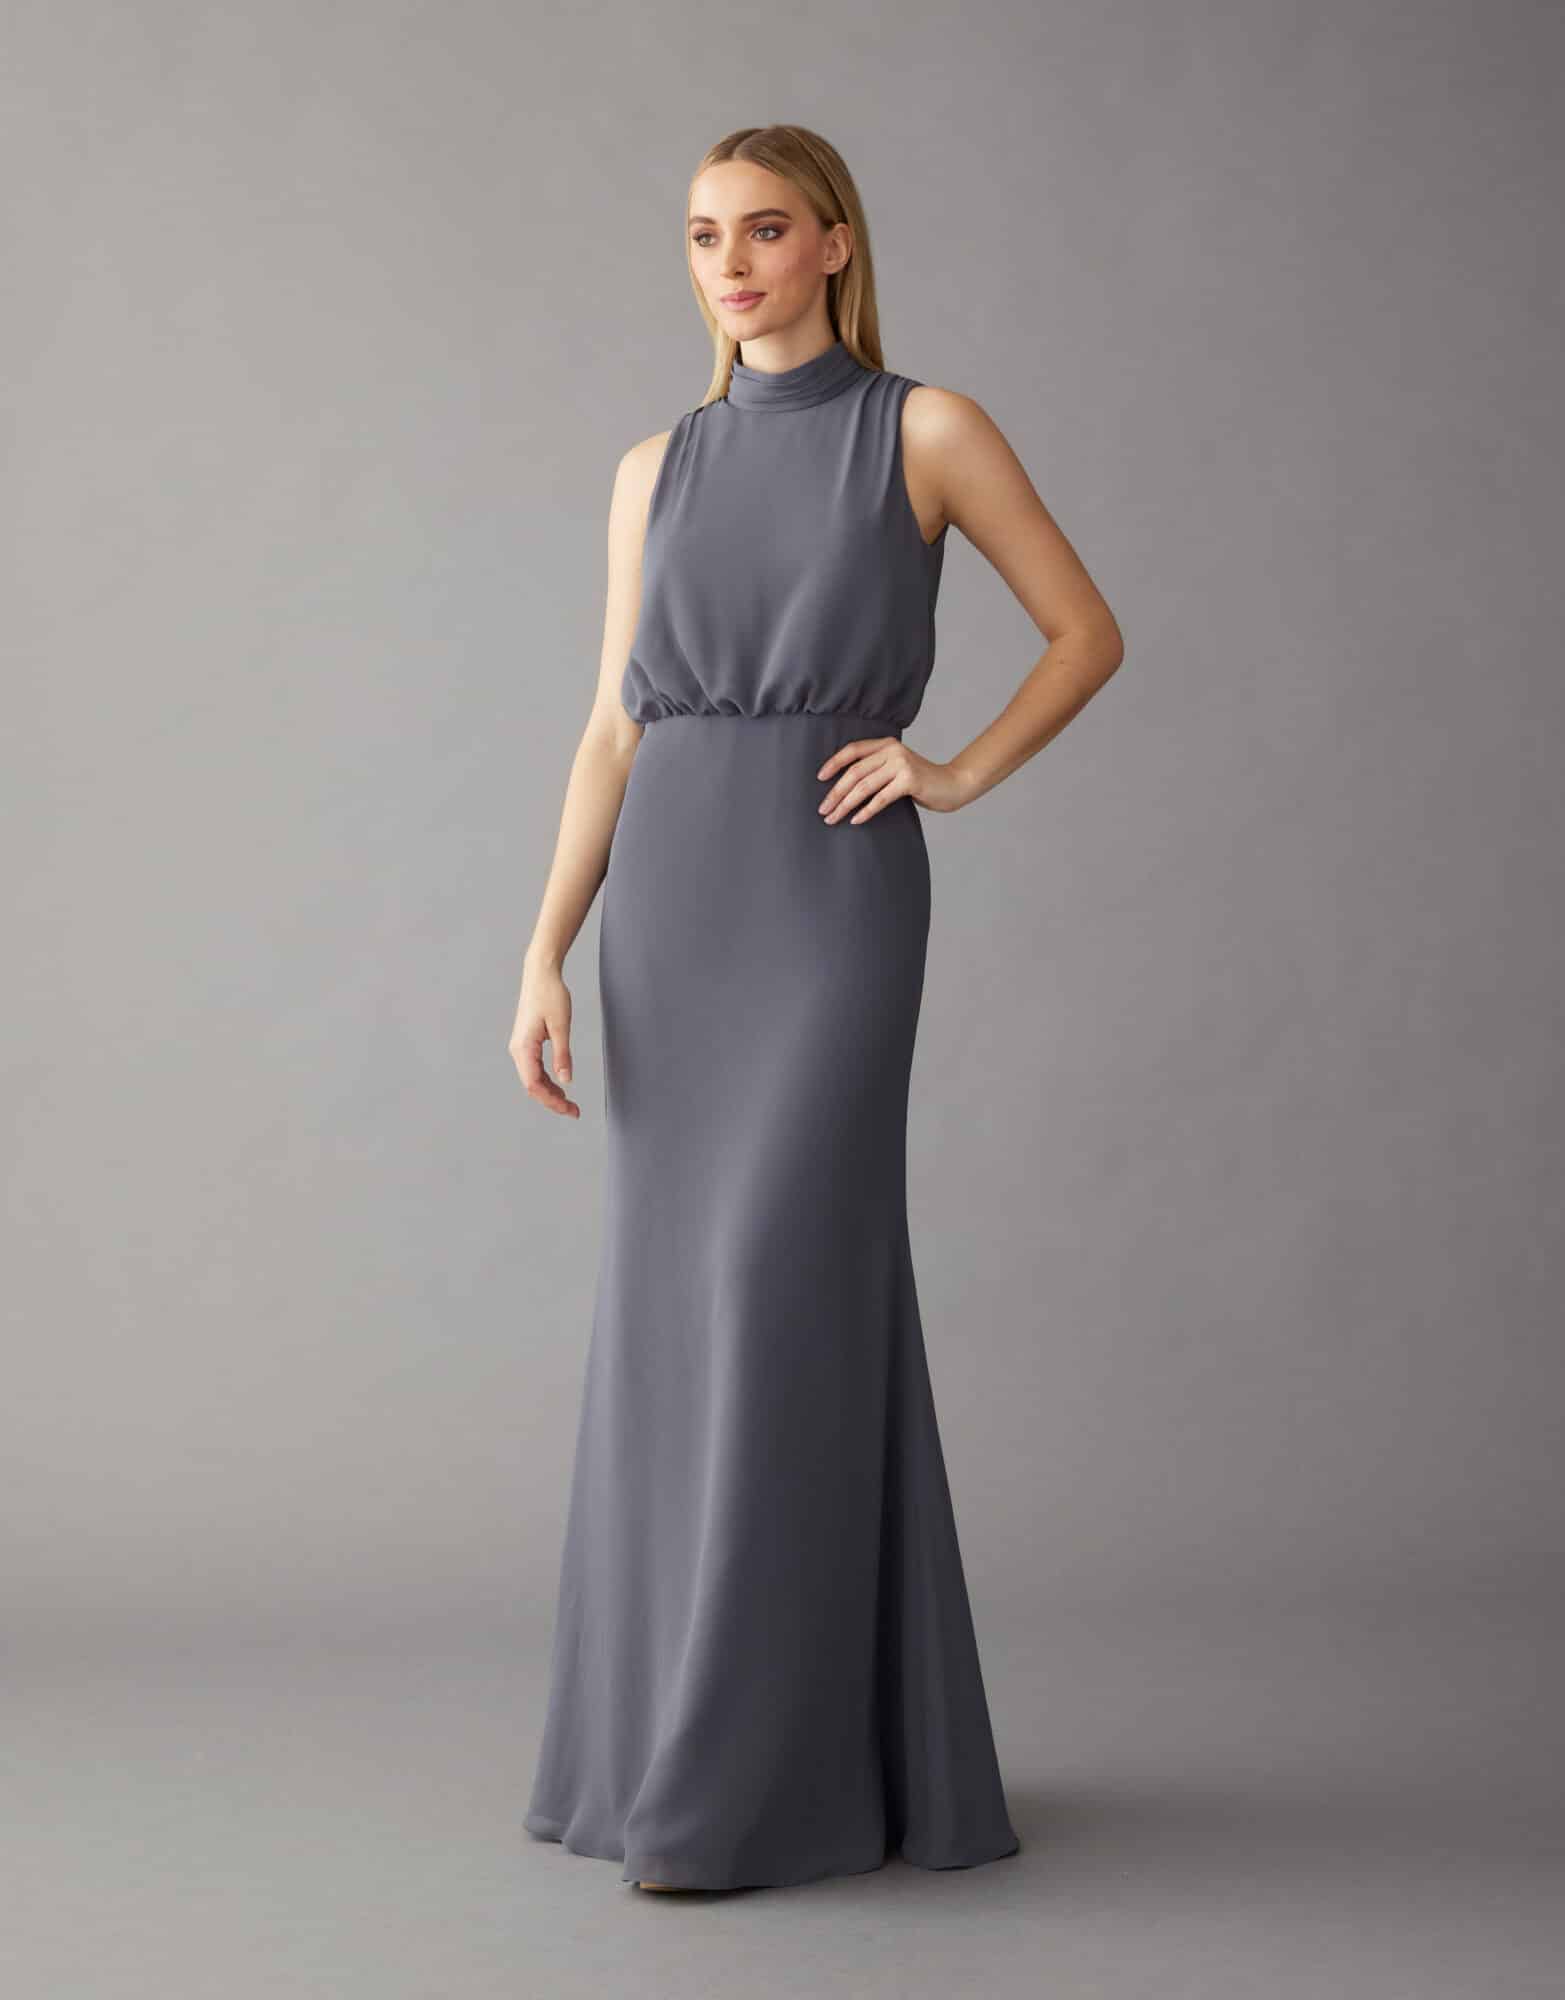 Hayley Paige Occasions Bridesmaid Dresses | Bridal Reflections